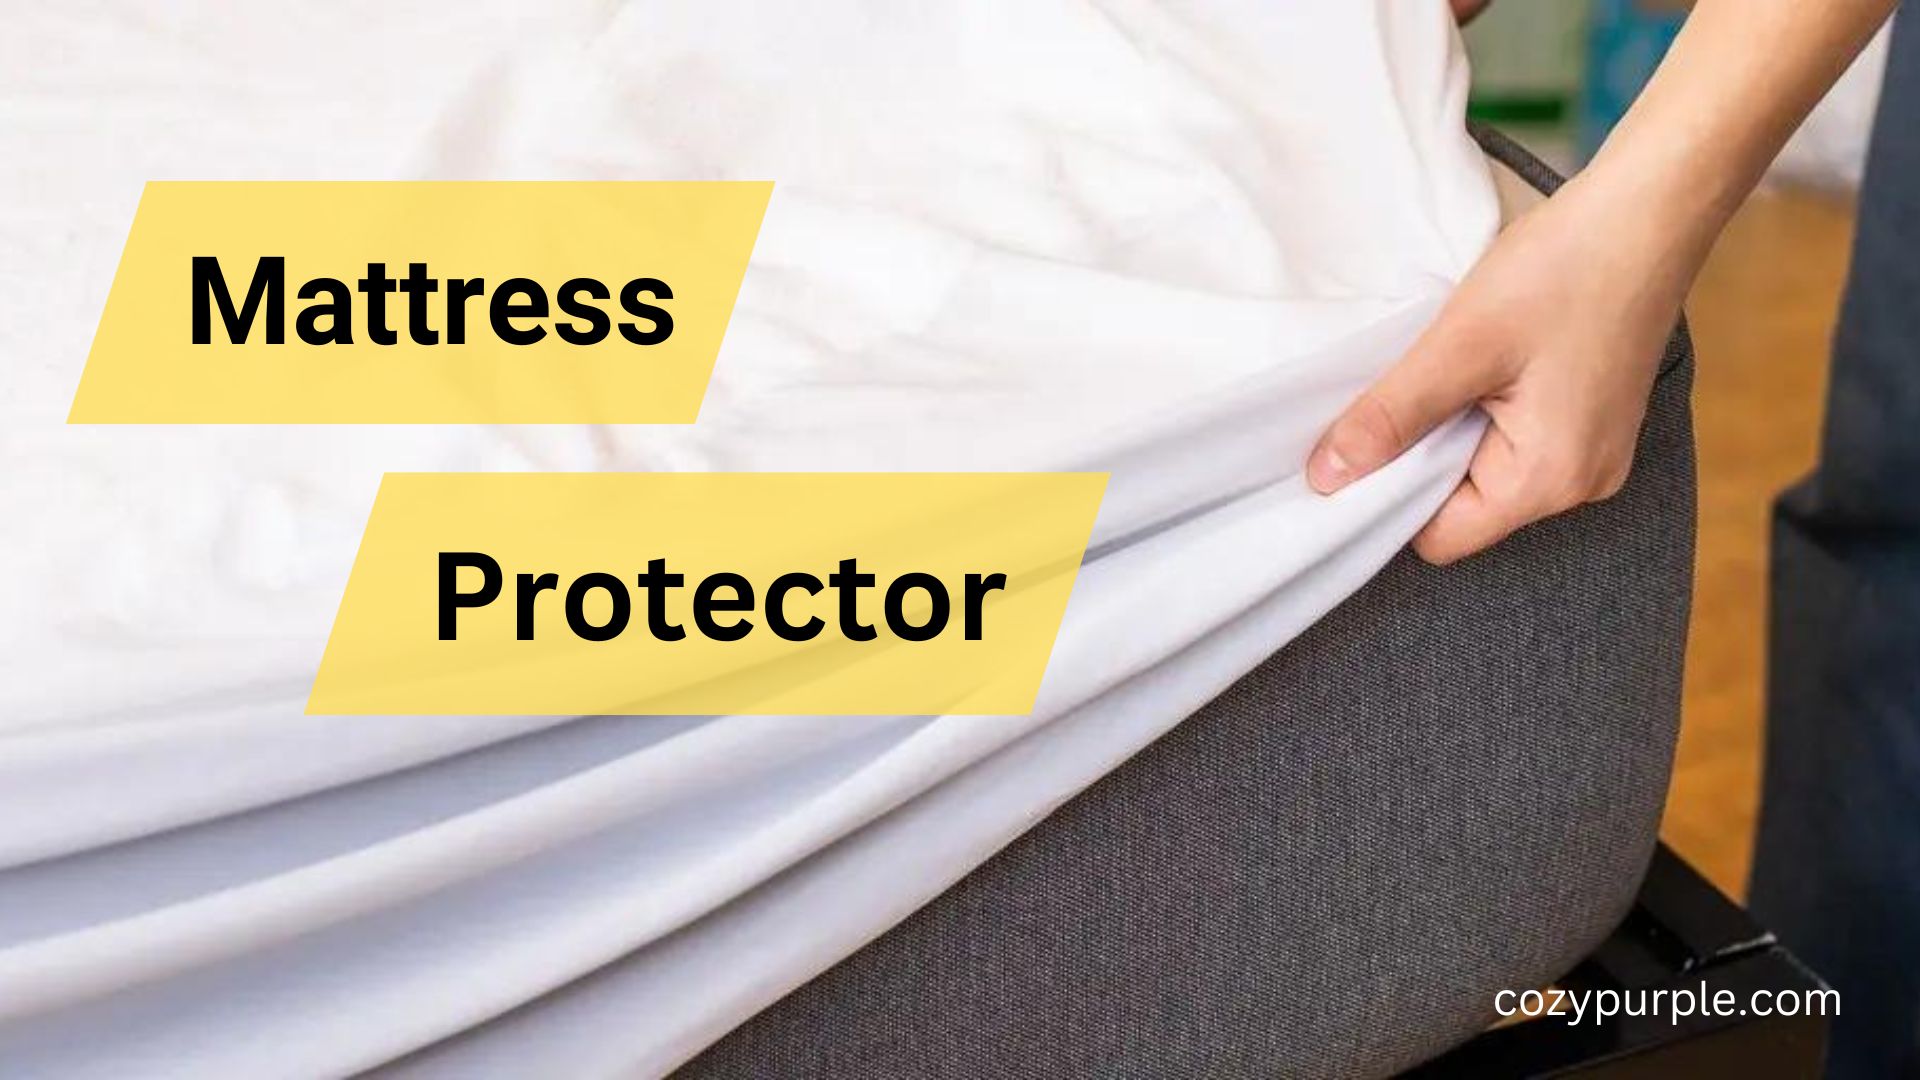 what is a mattress protector?